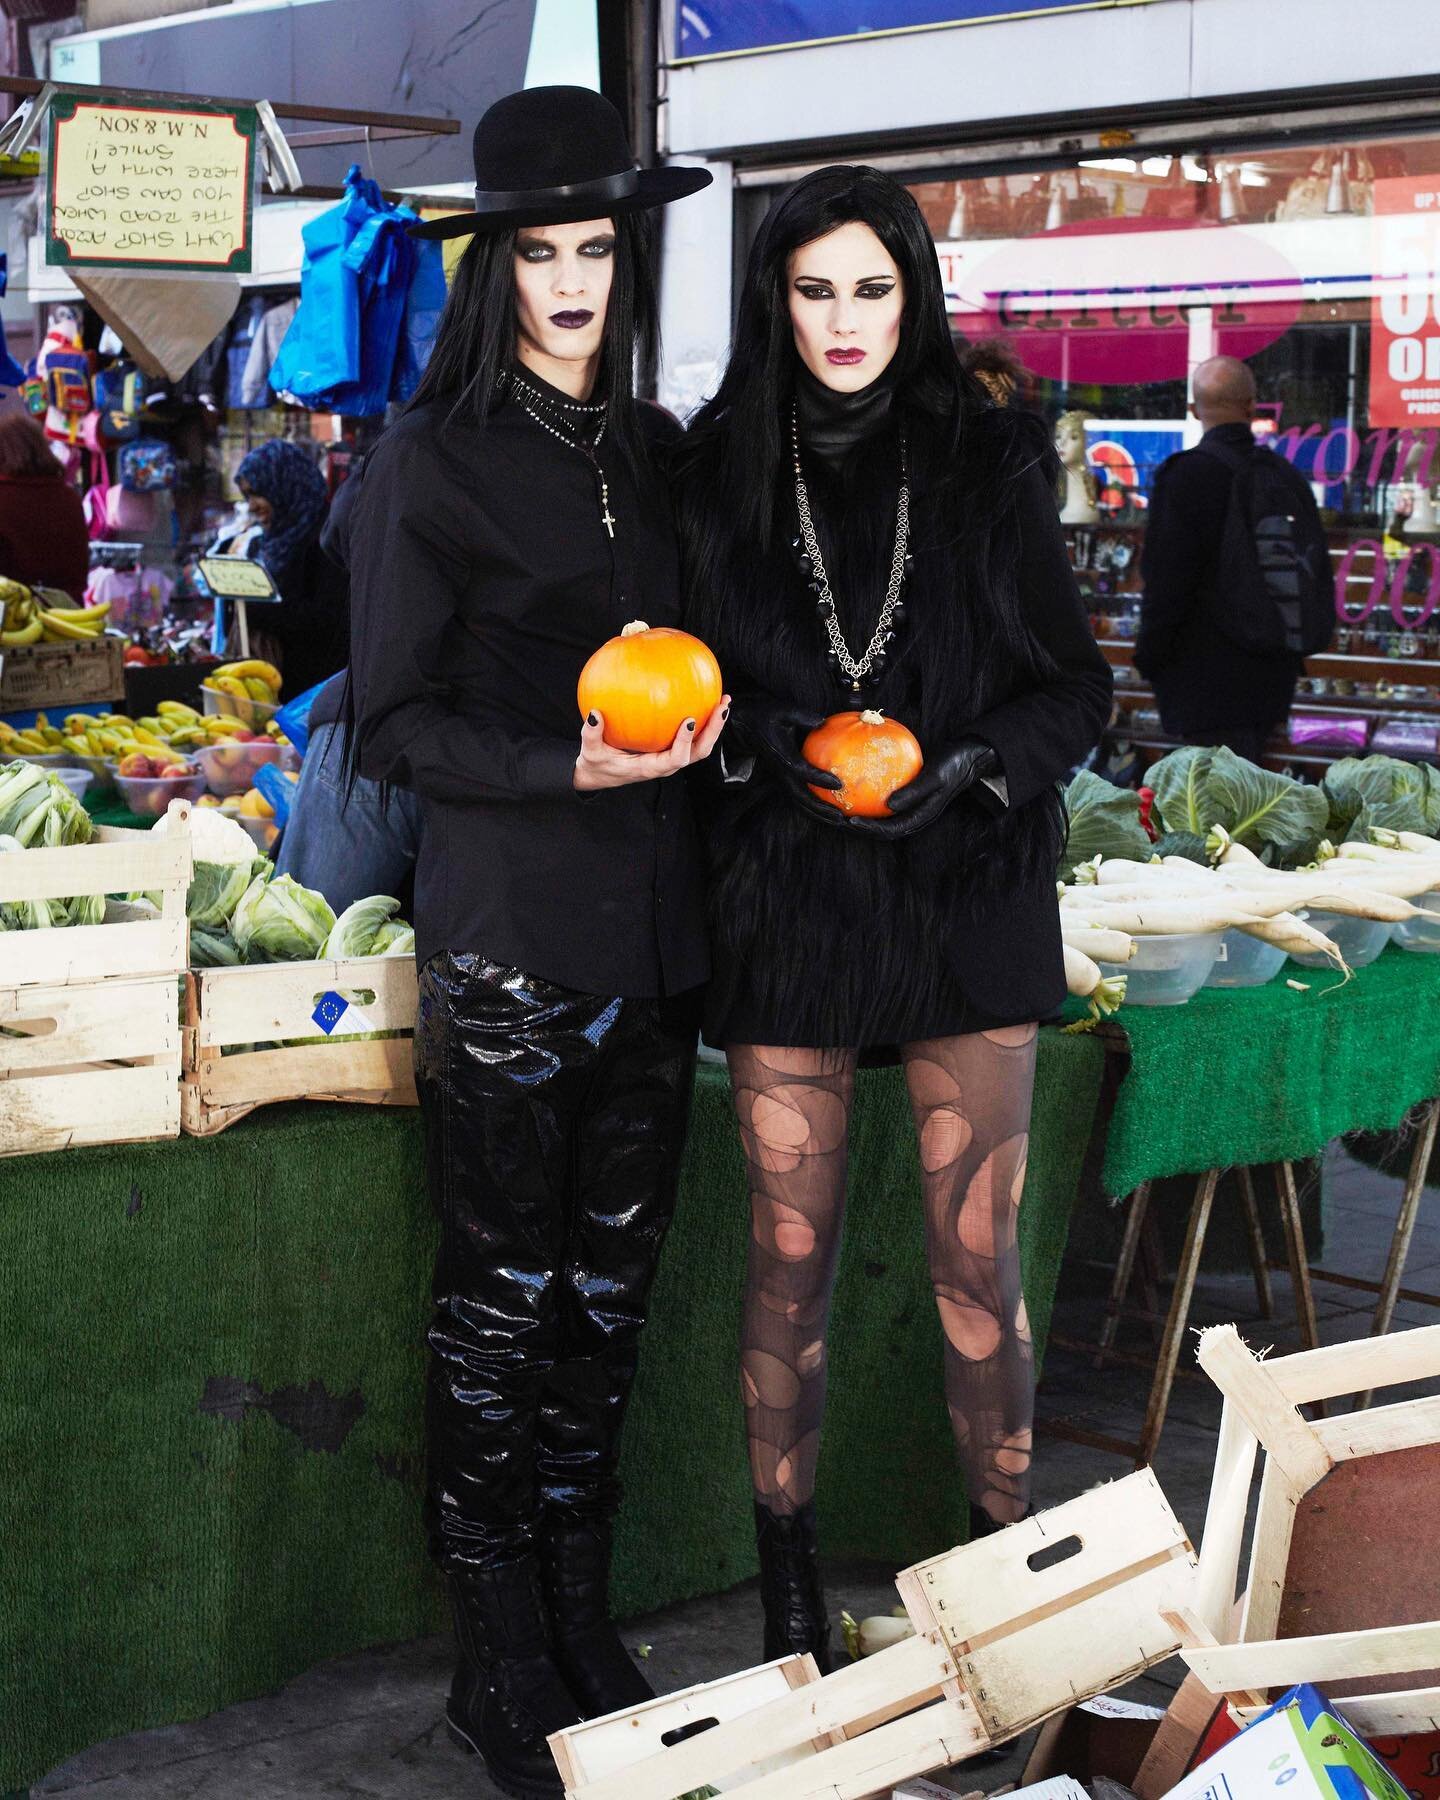 👻 Halloween shoot from the archives, Goths in East London for @i_d 

Also check out the Bieber ballon on slide two 🎈 

@anderschristianmadsen 
@anthonystephinson 
@charlielemindu 
@mollyaitken1 

#goth #gothaesthetic #halloween #fashioneditorial #a